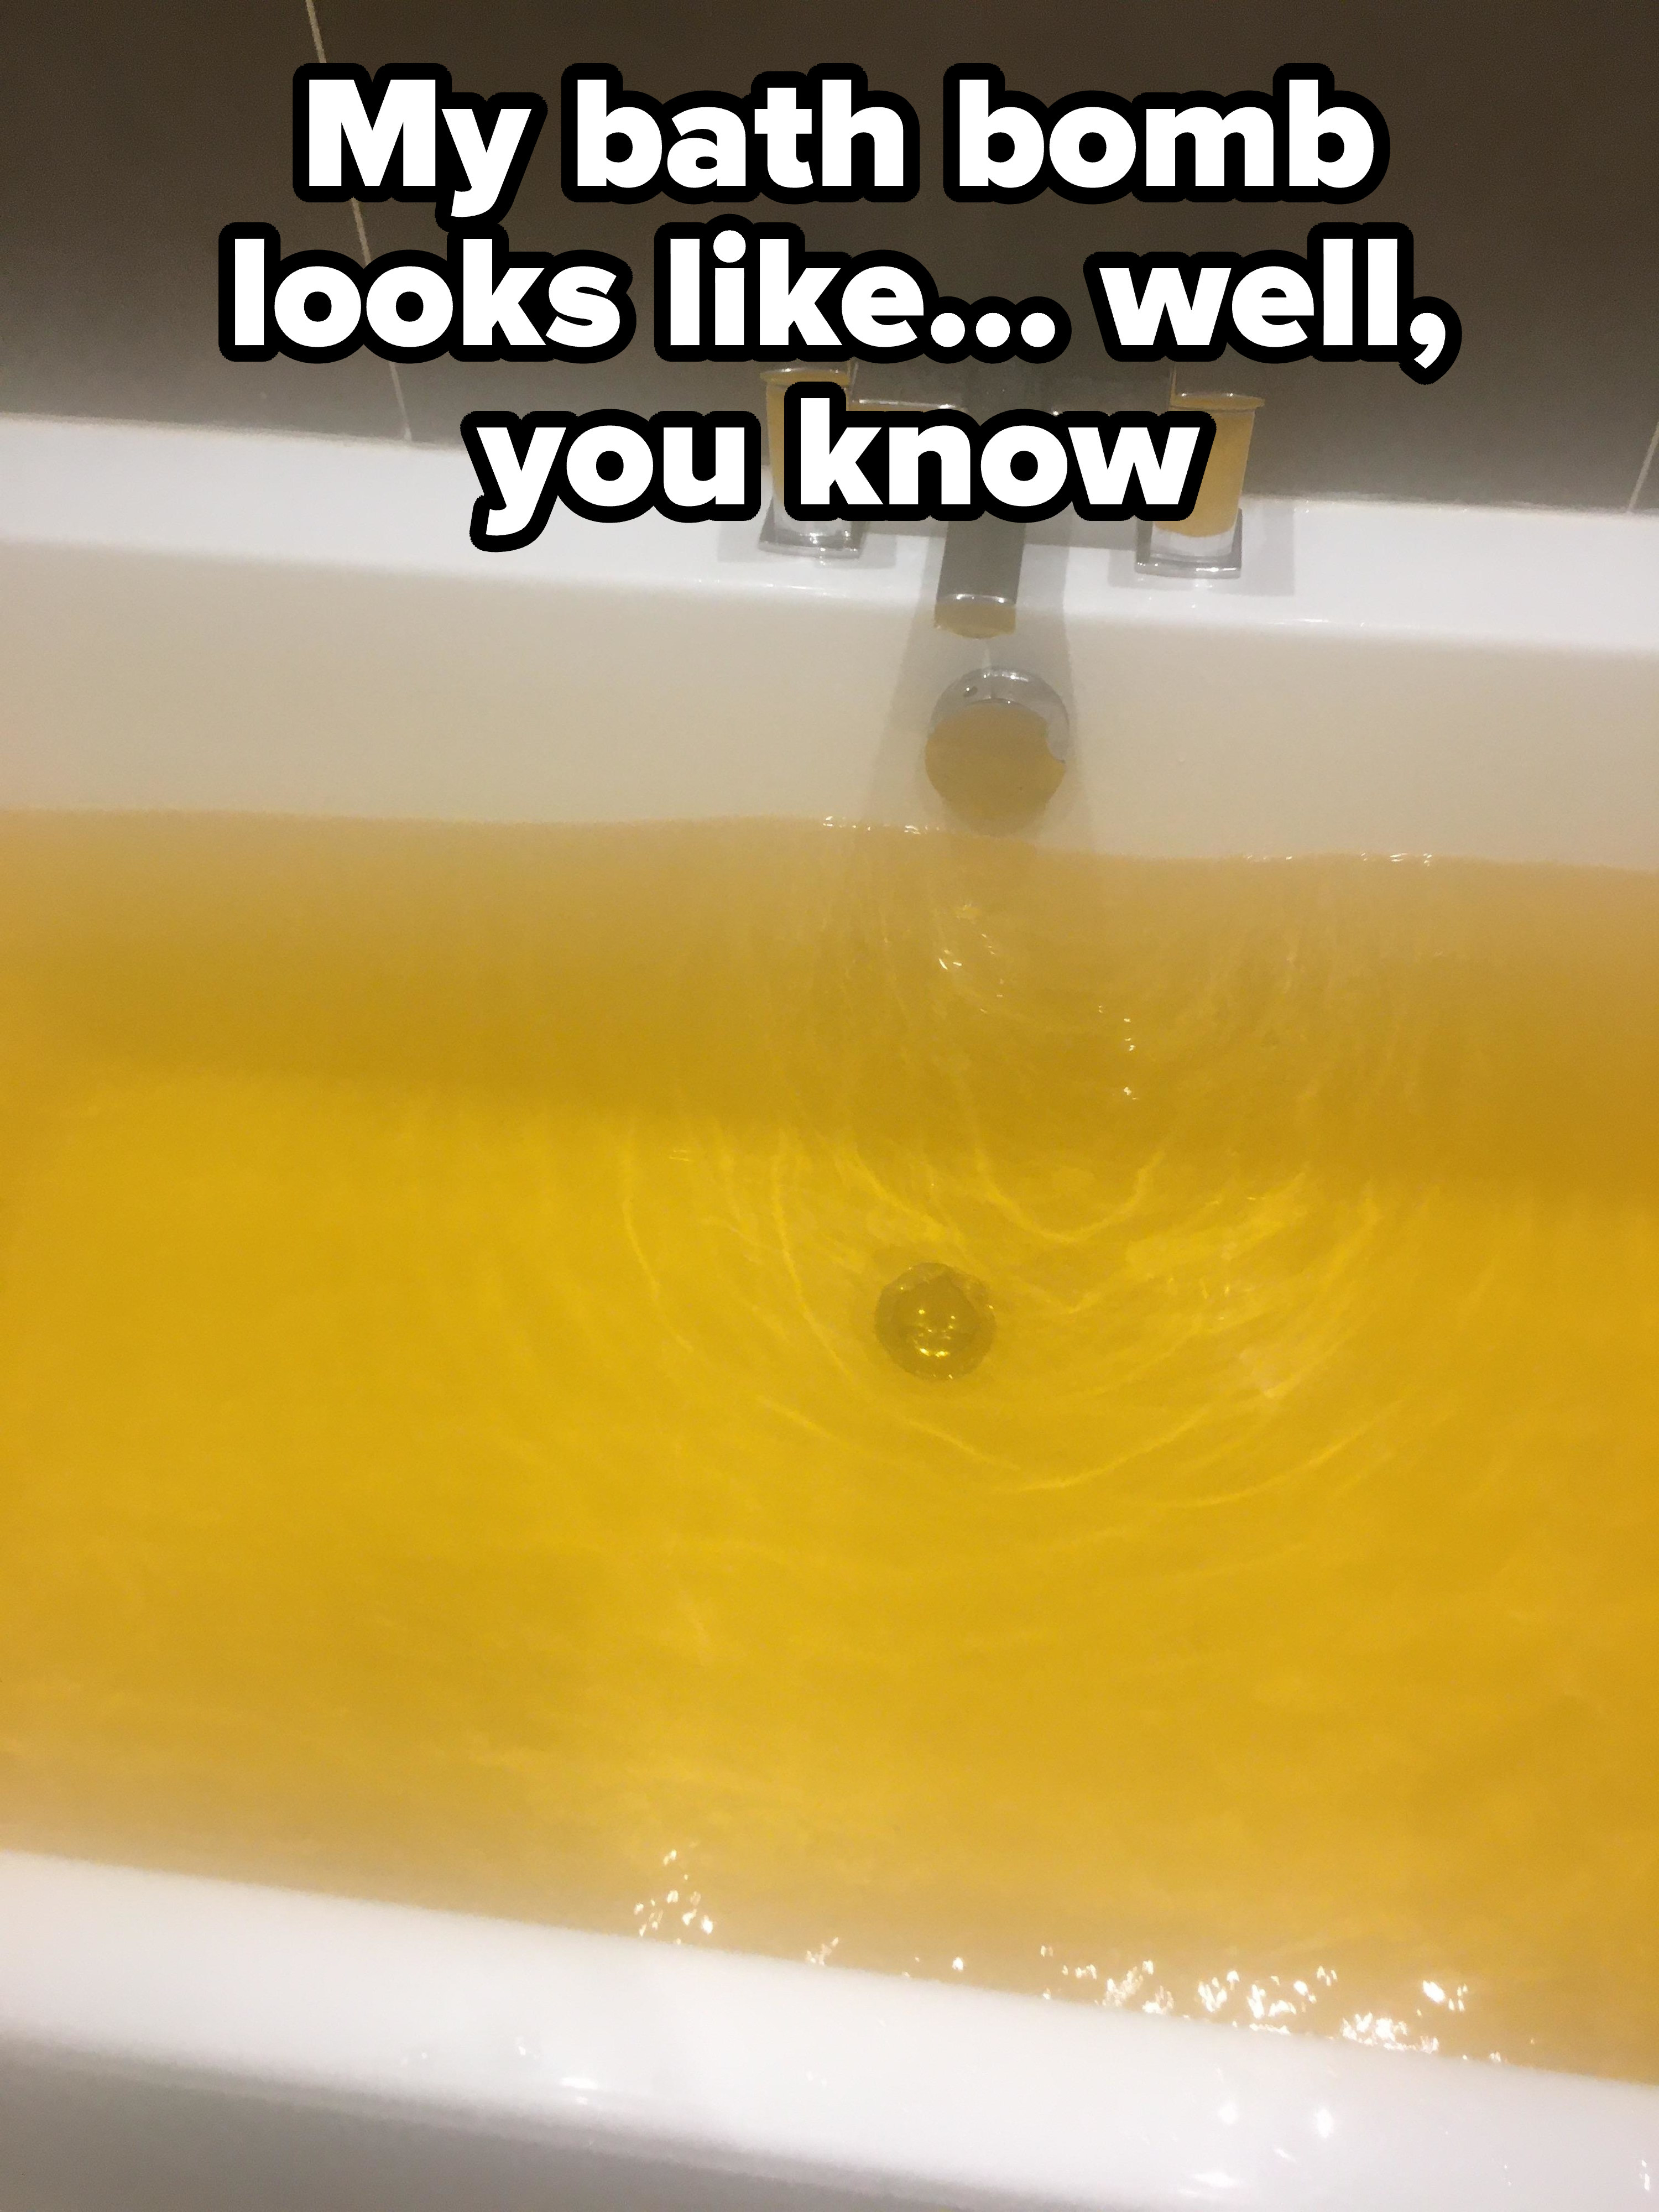 A bathtub filled with yellow water